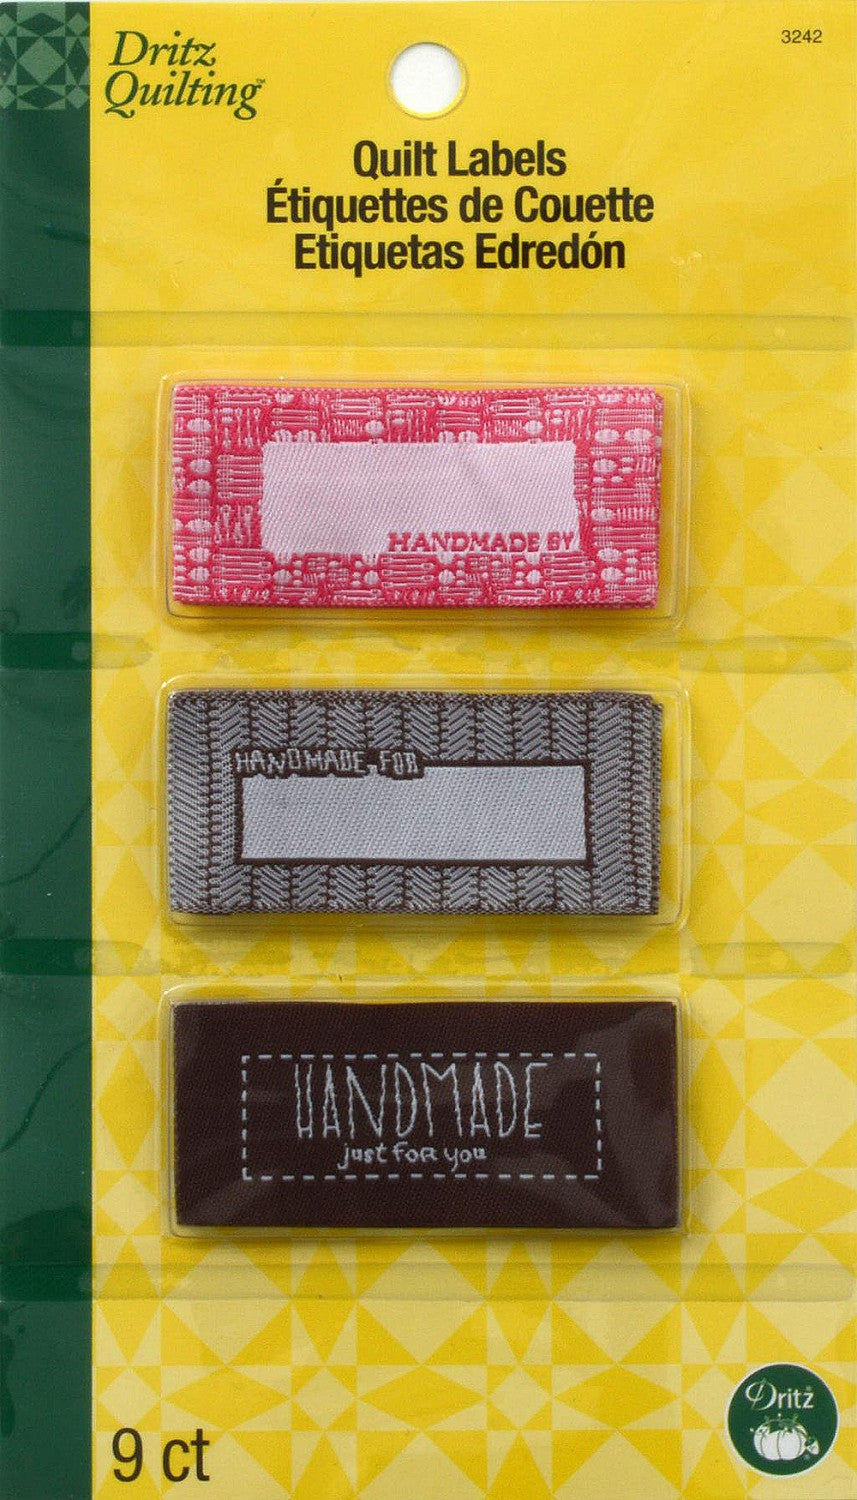 Quilt Labels - Handmade for You